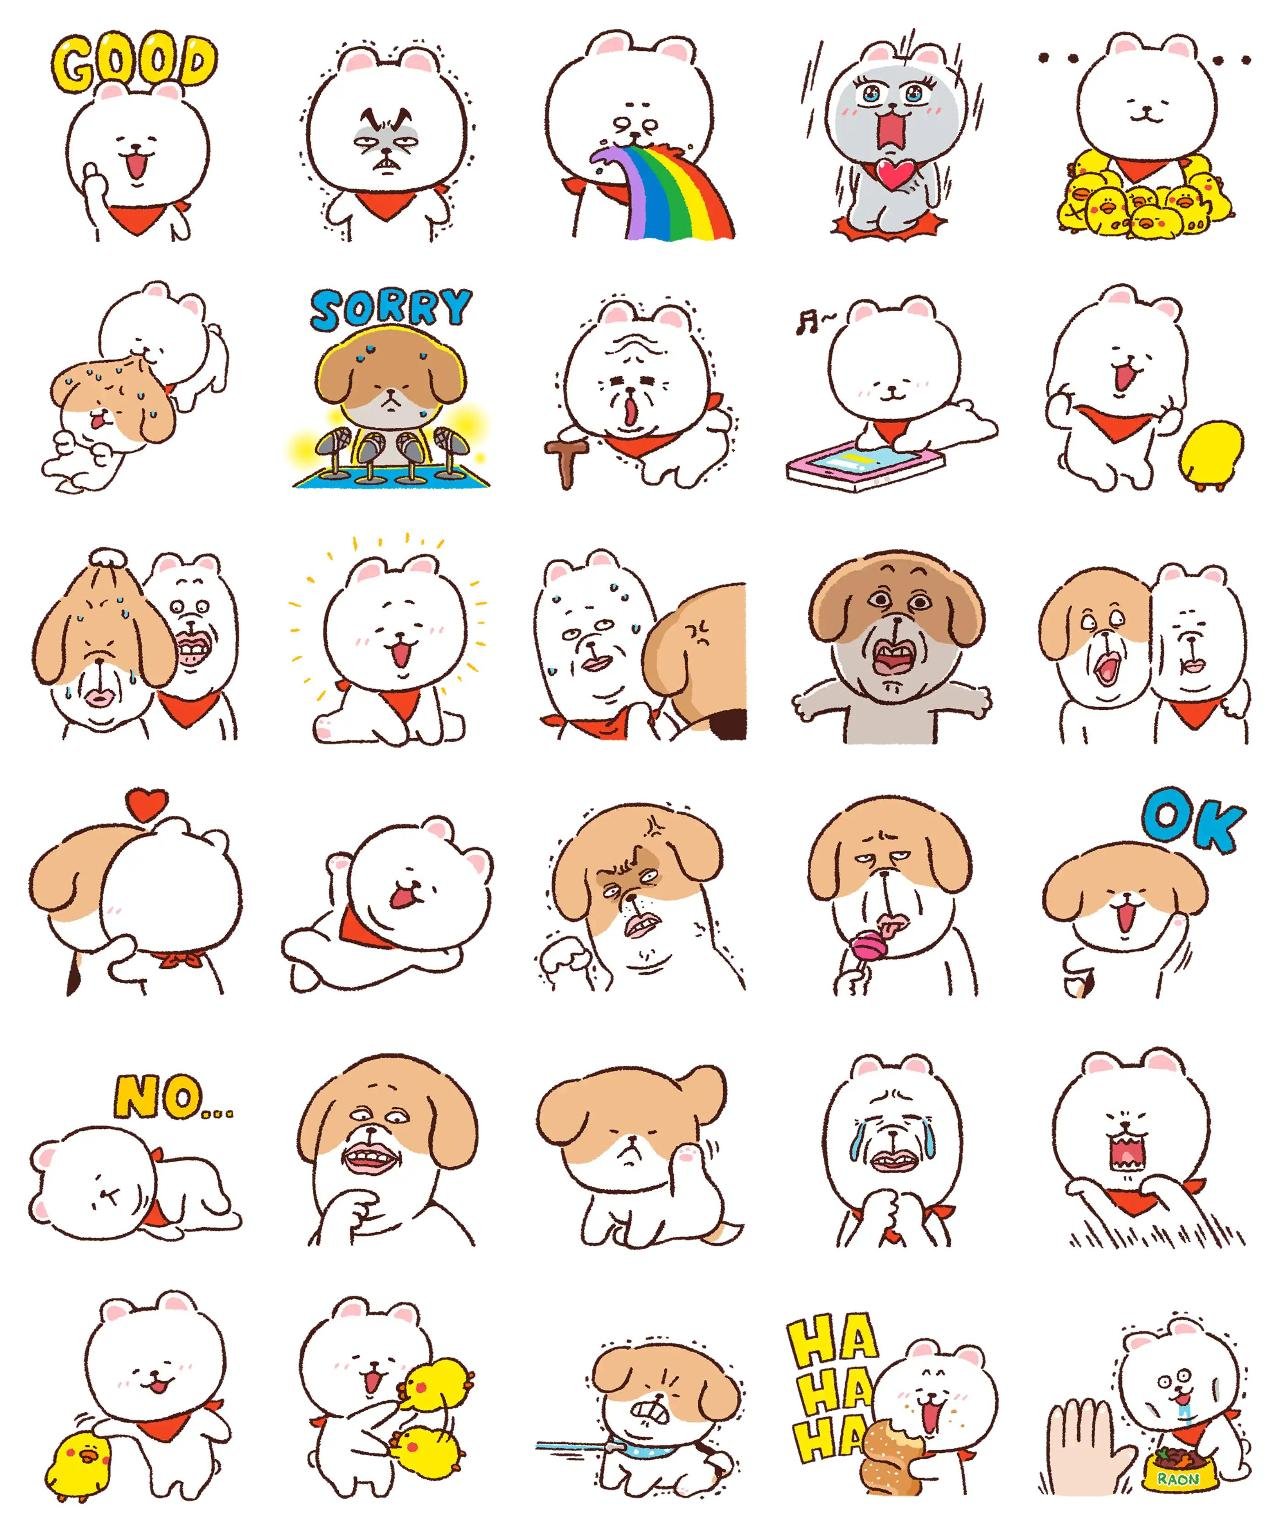 Beagle and Pomeranian 01 Animals,Gag sticker pack for Whatsapp, Telegram, Signal, and others chatting and message apps